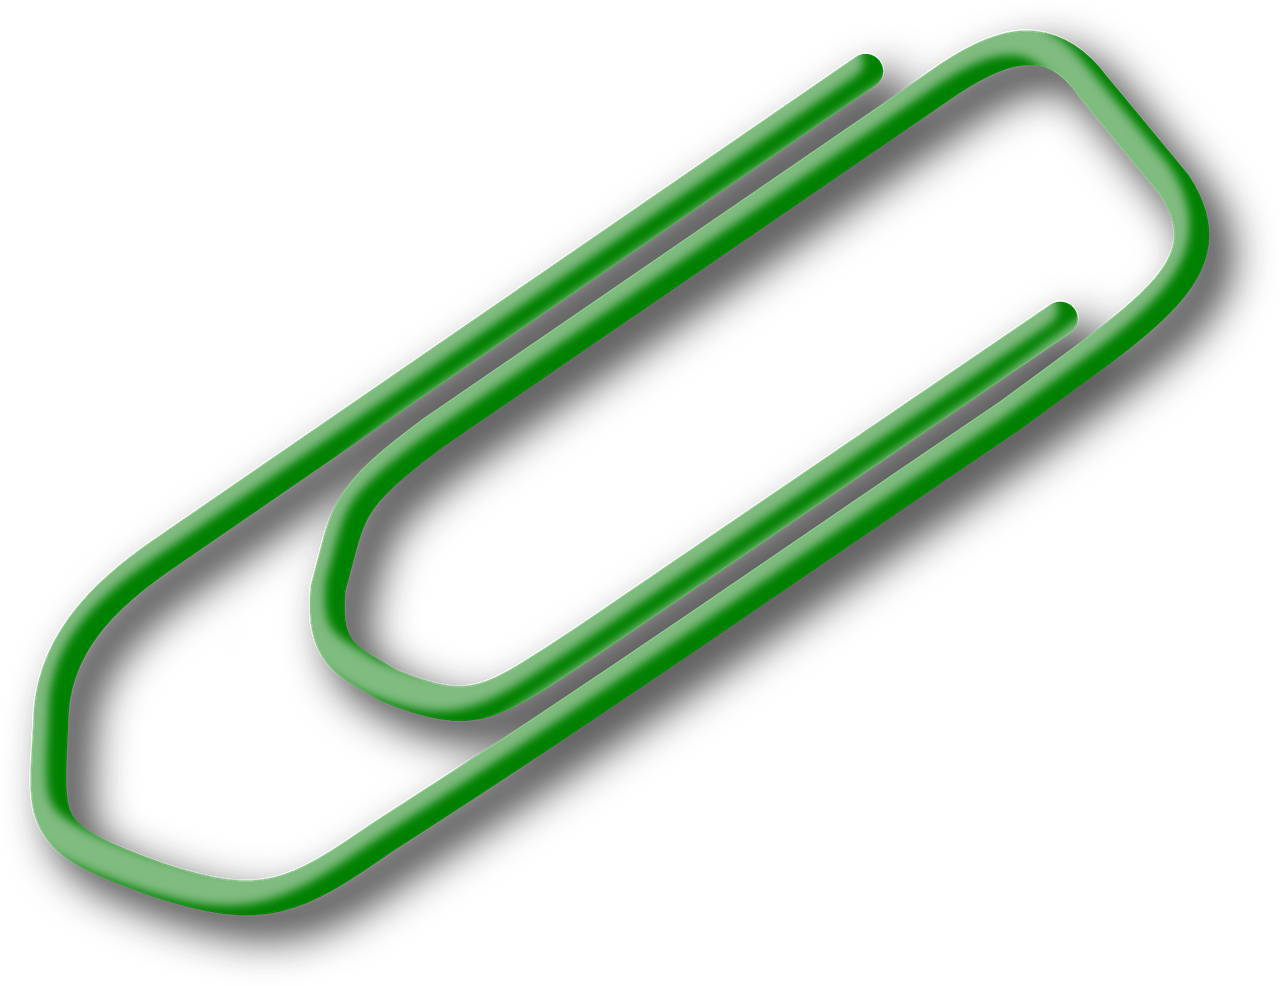 A Green Paper Clip On A Black Background